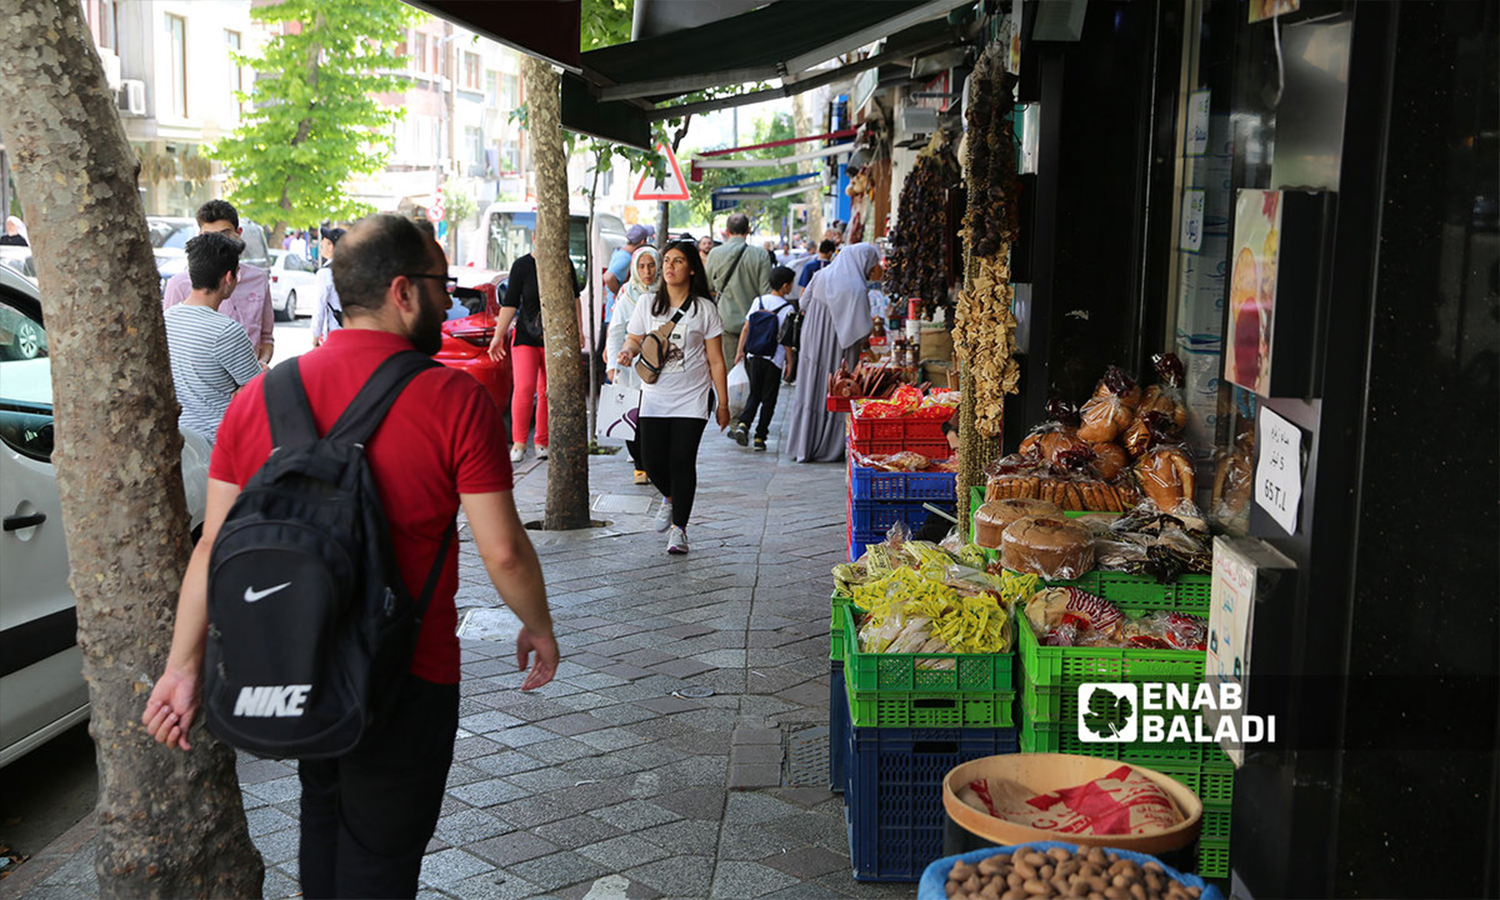 Pedestrians in a street market in the Turkish city of Istanbul - 21 May 2022 (Enab Baladi)